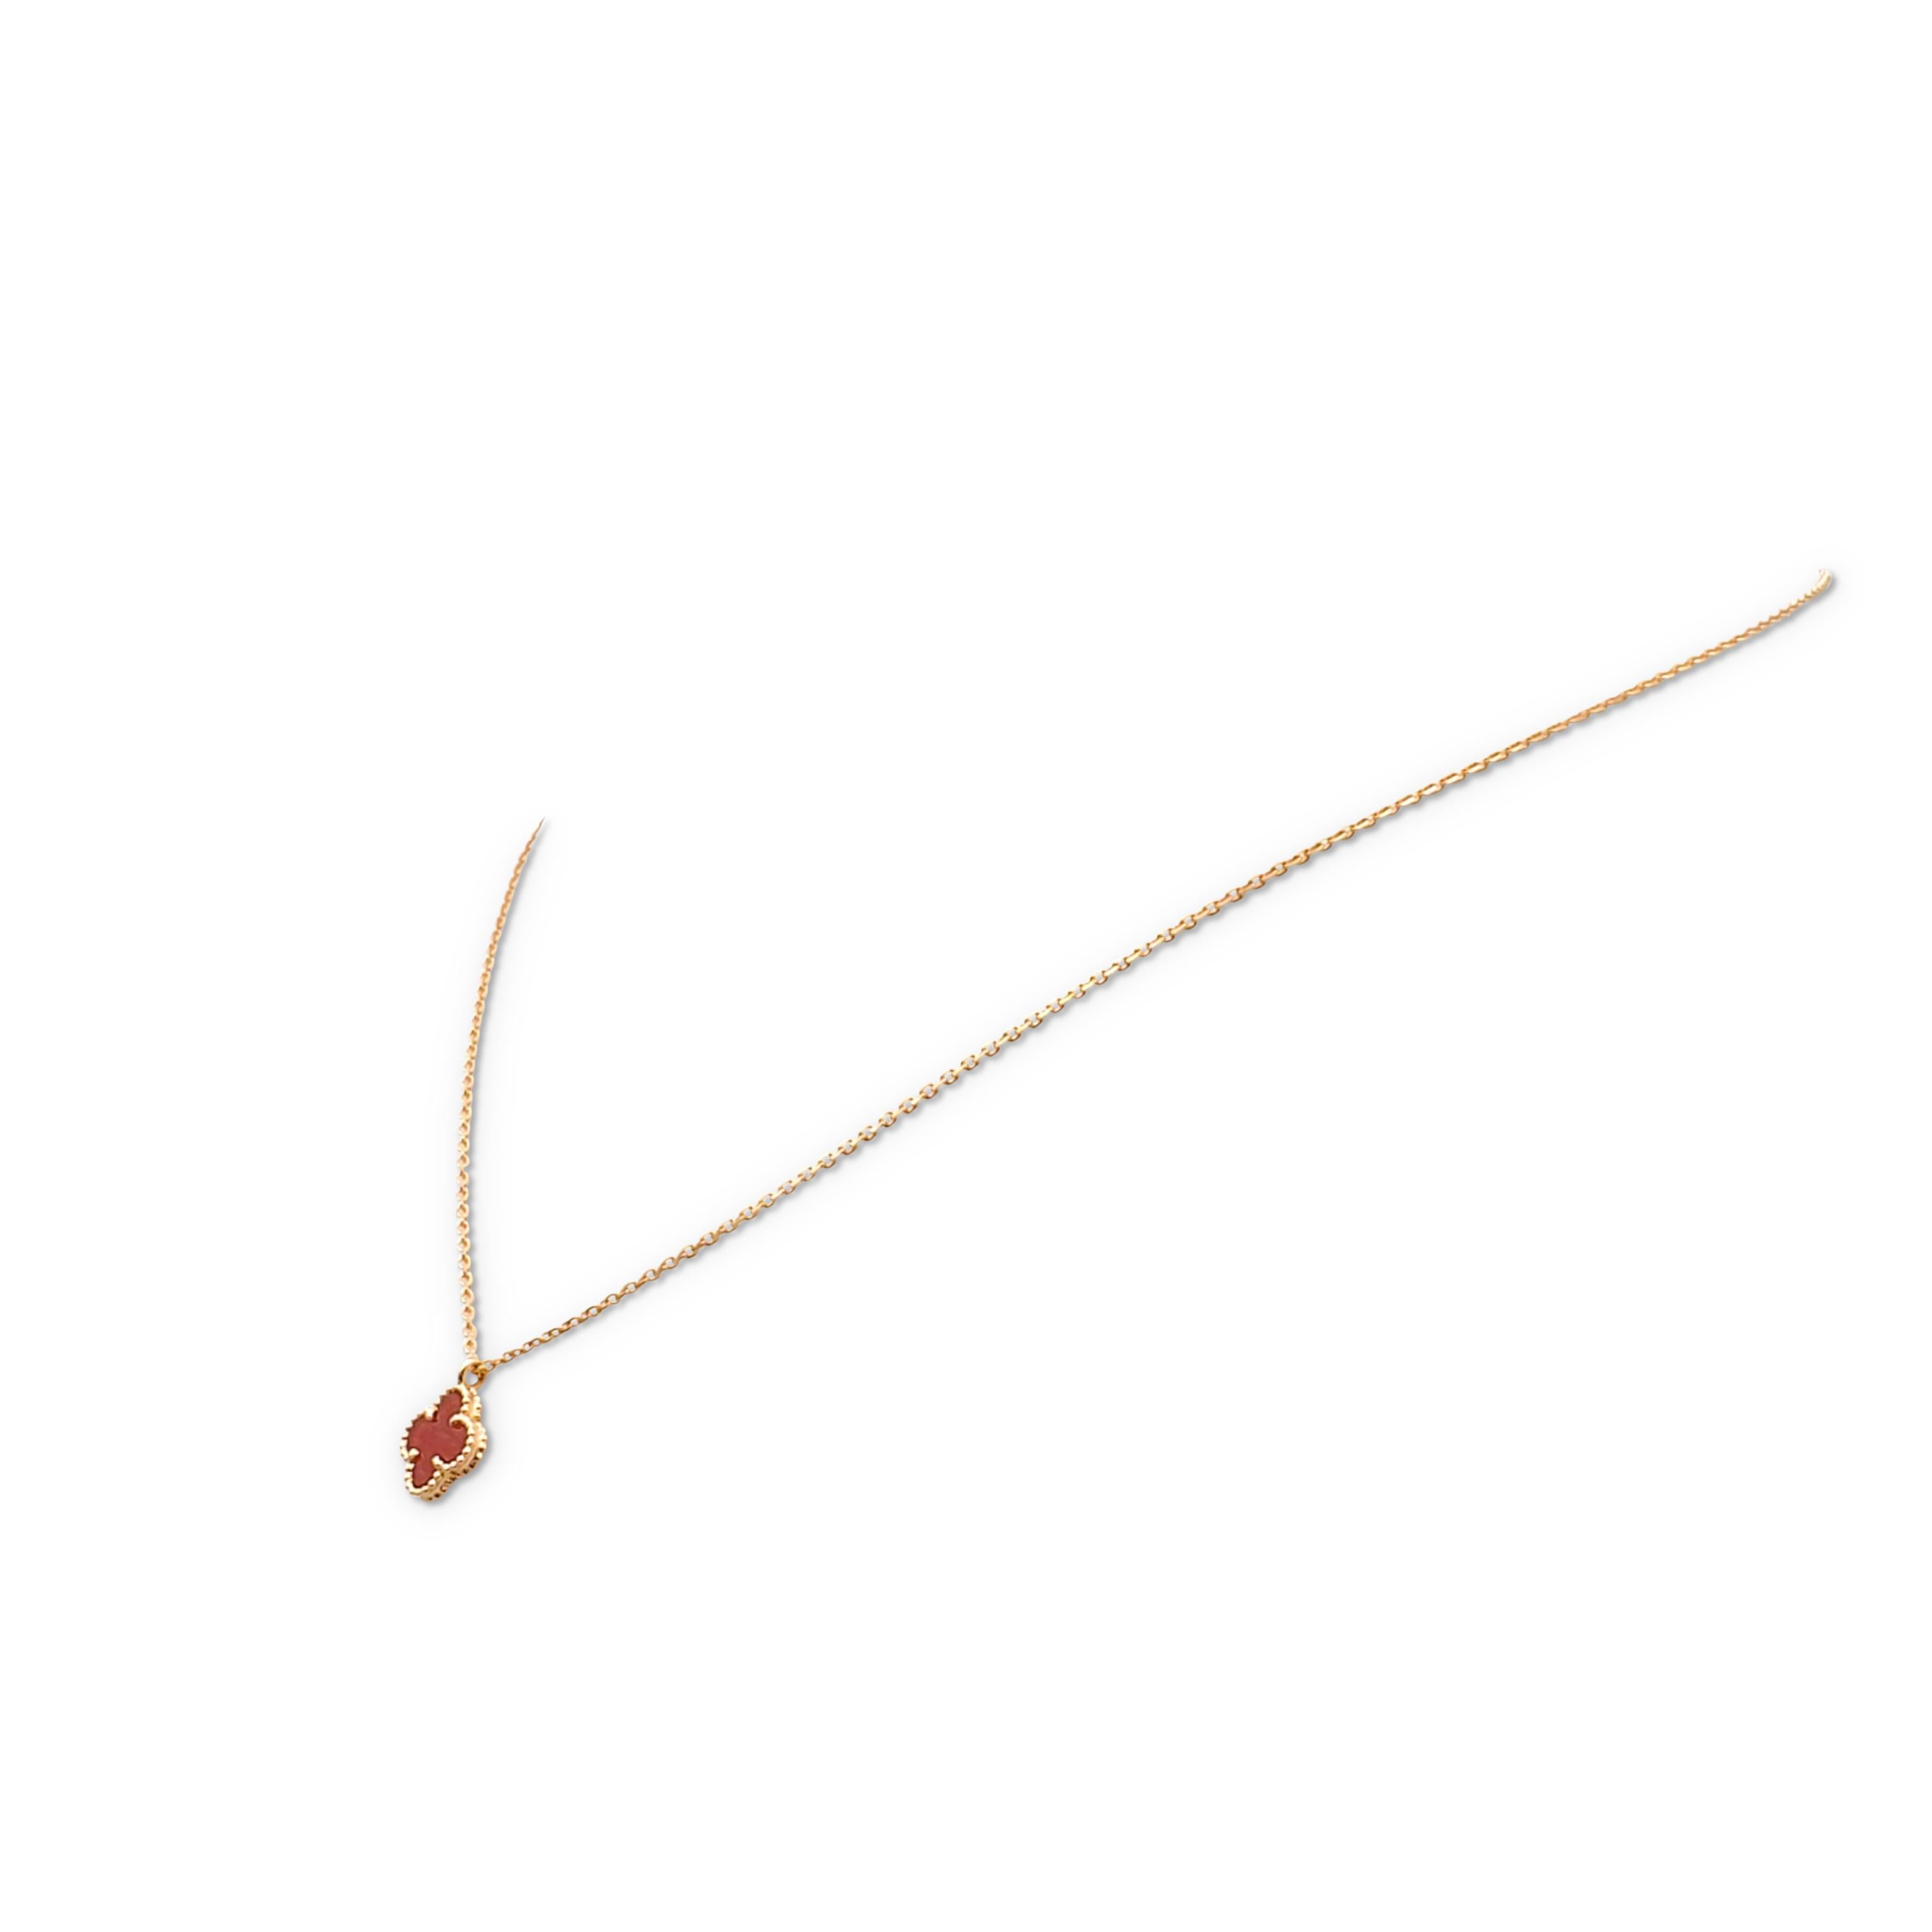 Authentic Van Cleef & Arpels 'sweet' Alhambra pendant necklace crafted in 18 karat rose gold and featuring a single motif pendant in carnelian. The necklace measures 16.5 inches in total length with an adjustable chain.  The pendant measures 4mm x